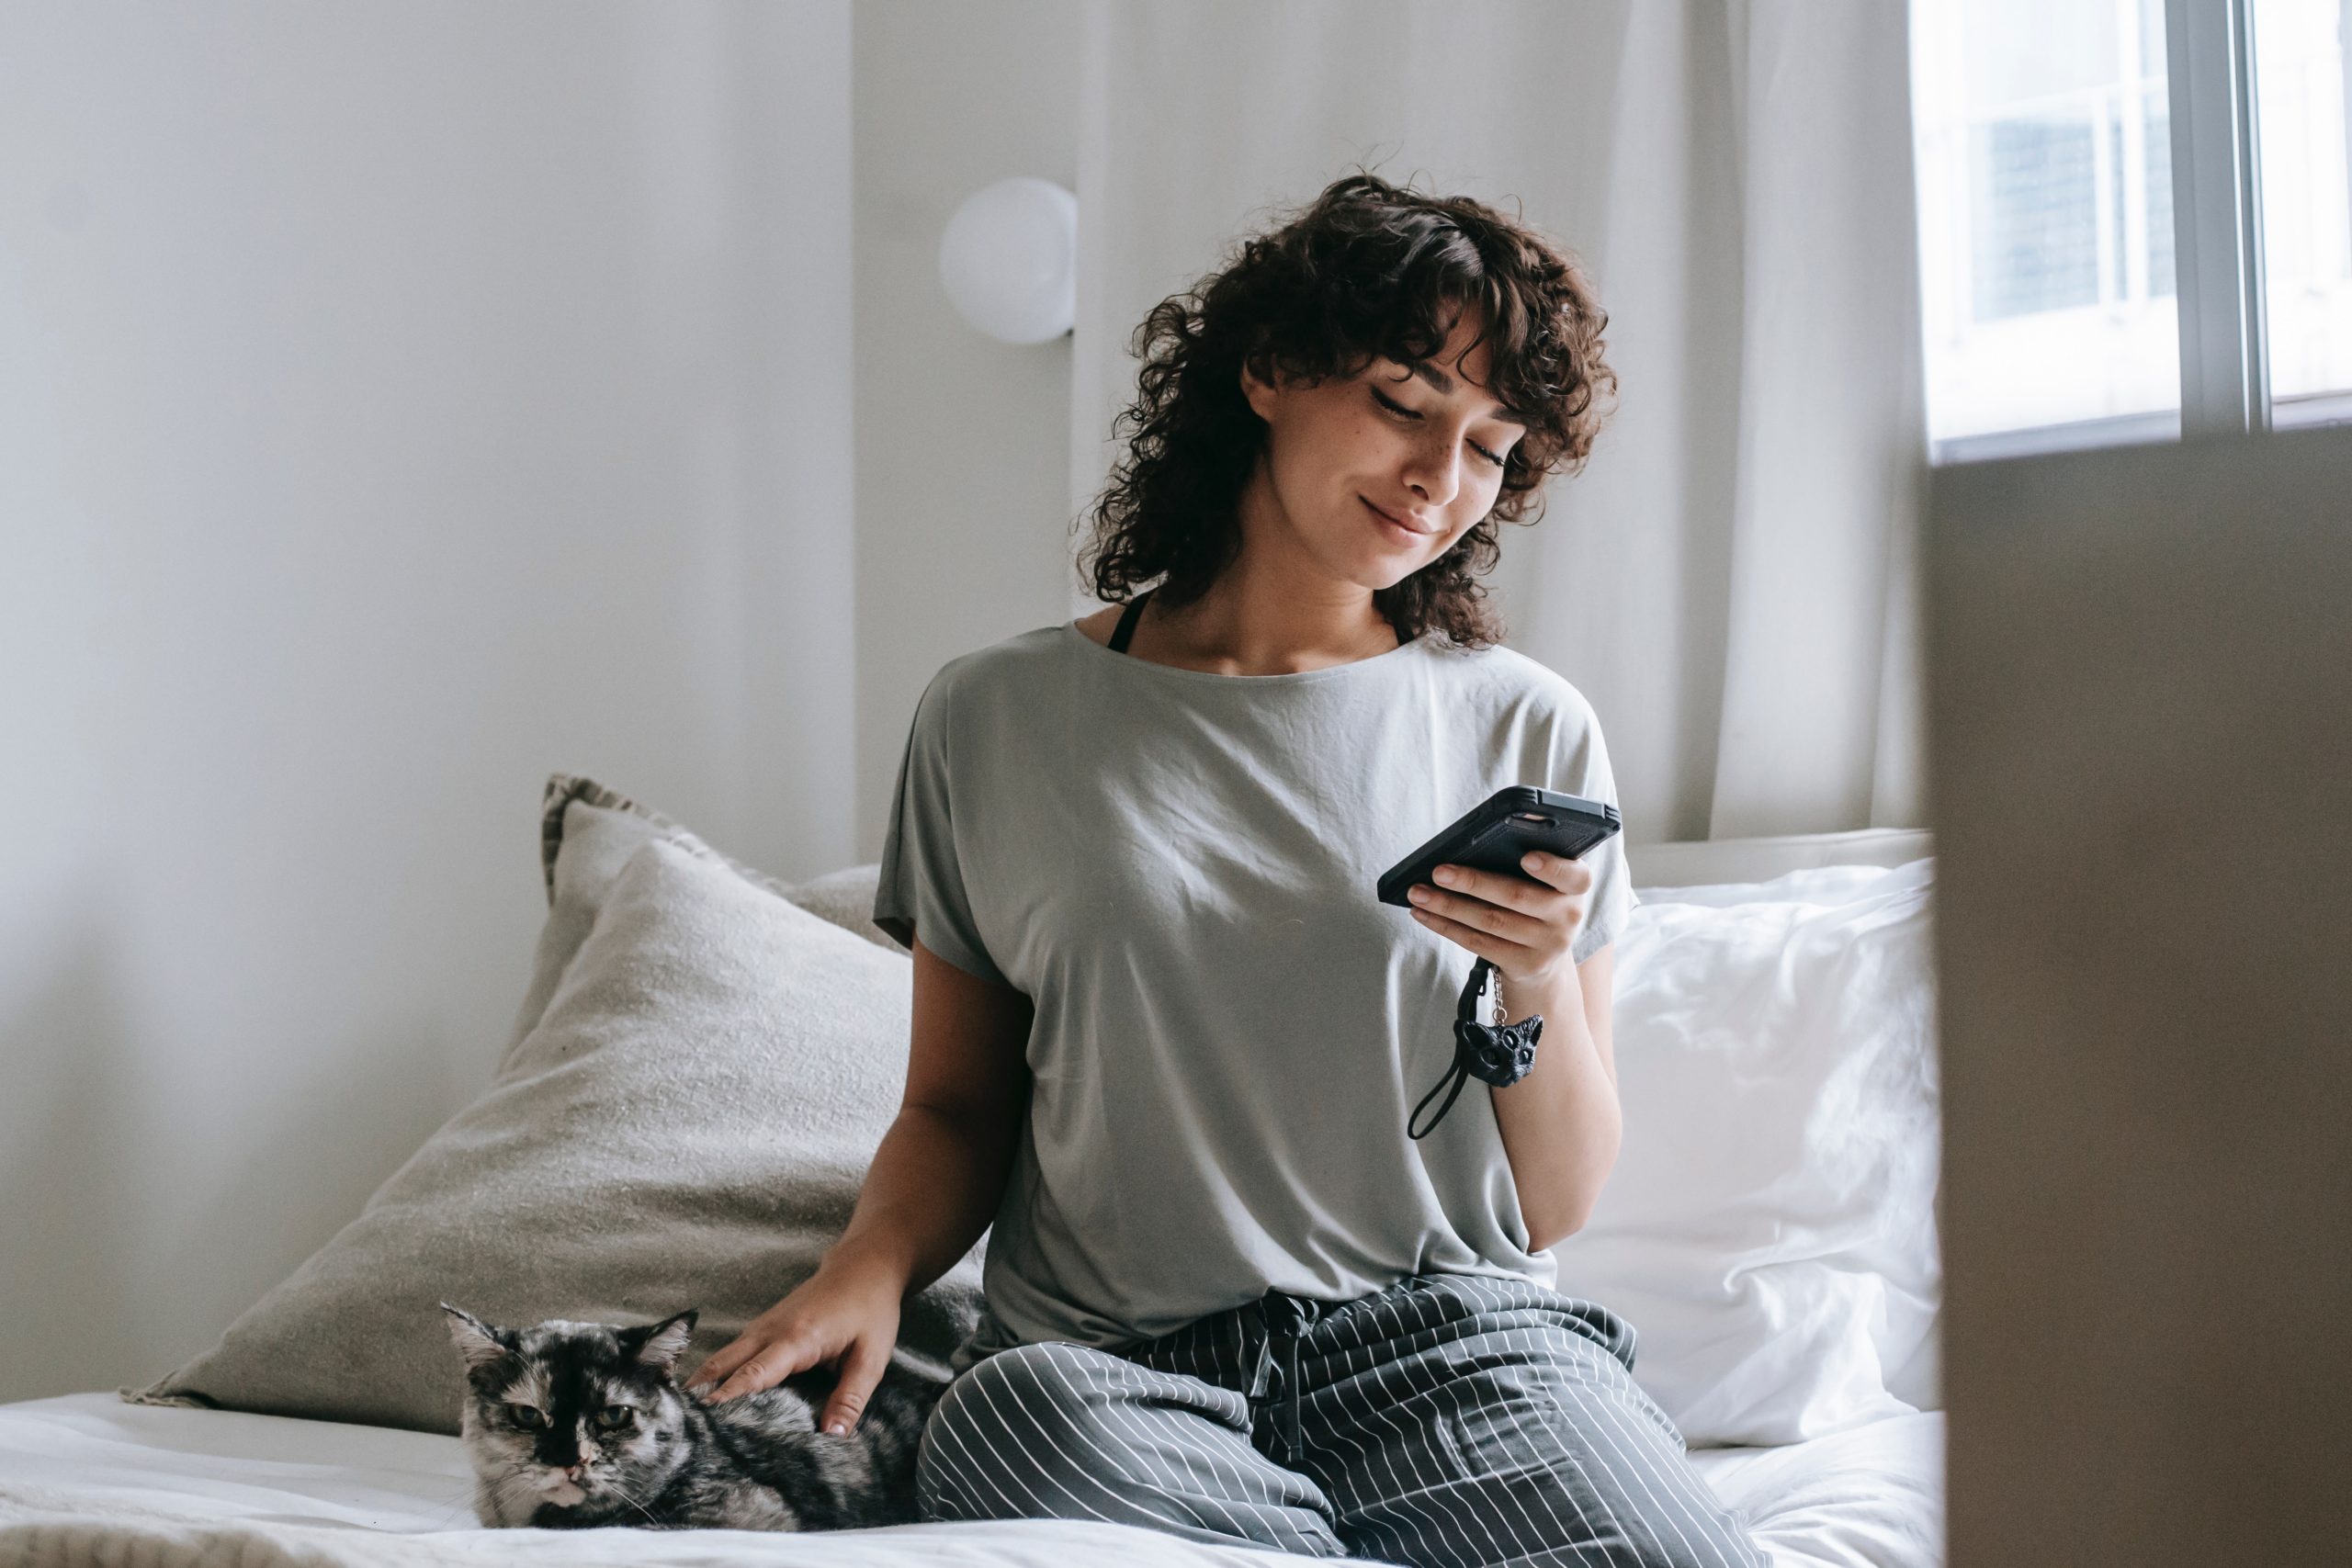 Smiling young ethnic female messaging on smartphone and petting cat on bed